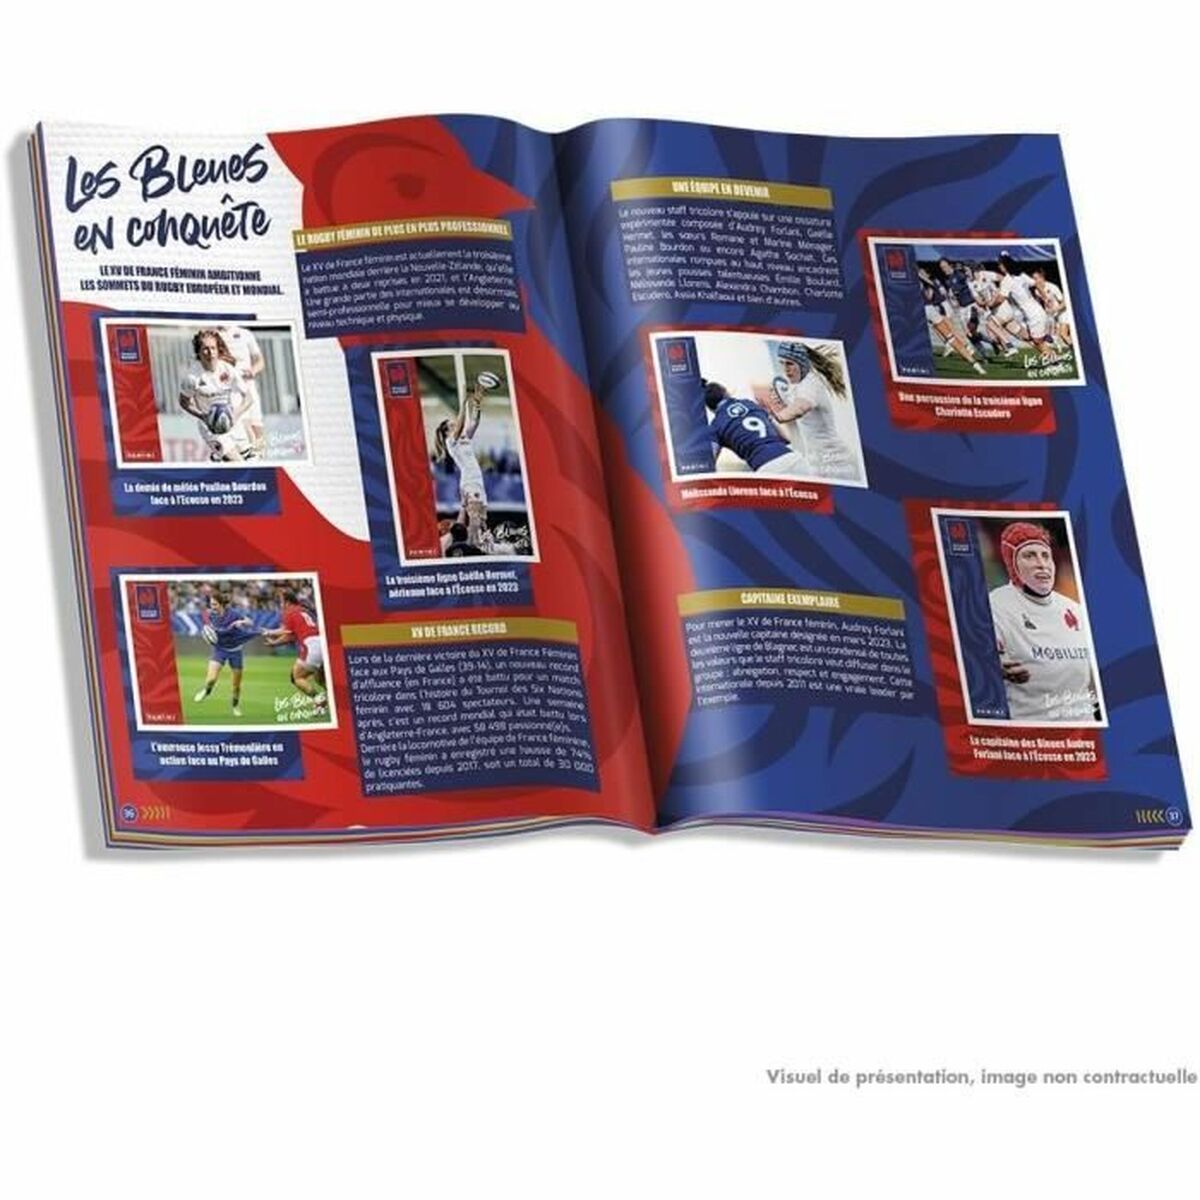 Sticker set Panini France Rugby - Little Baby Shop